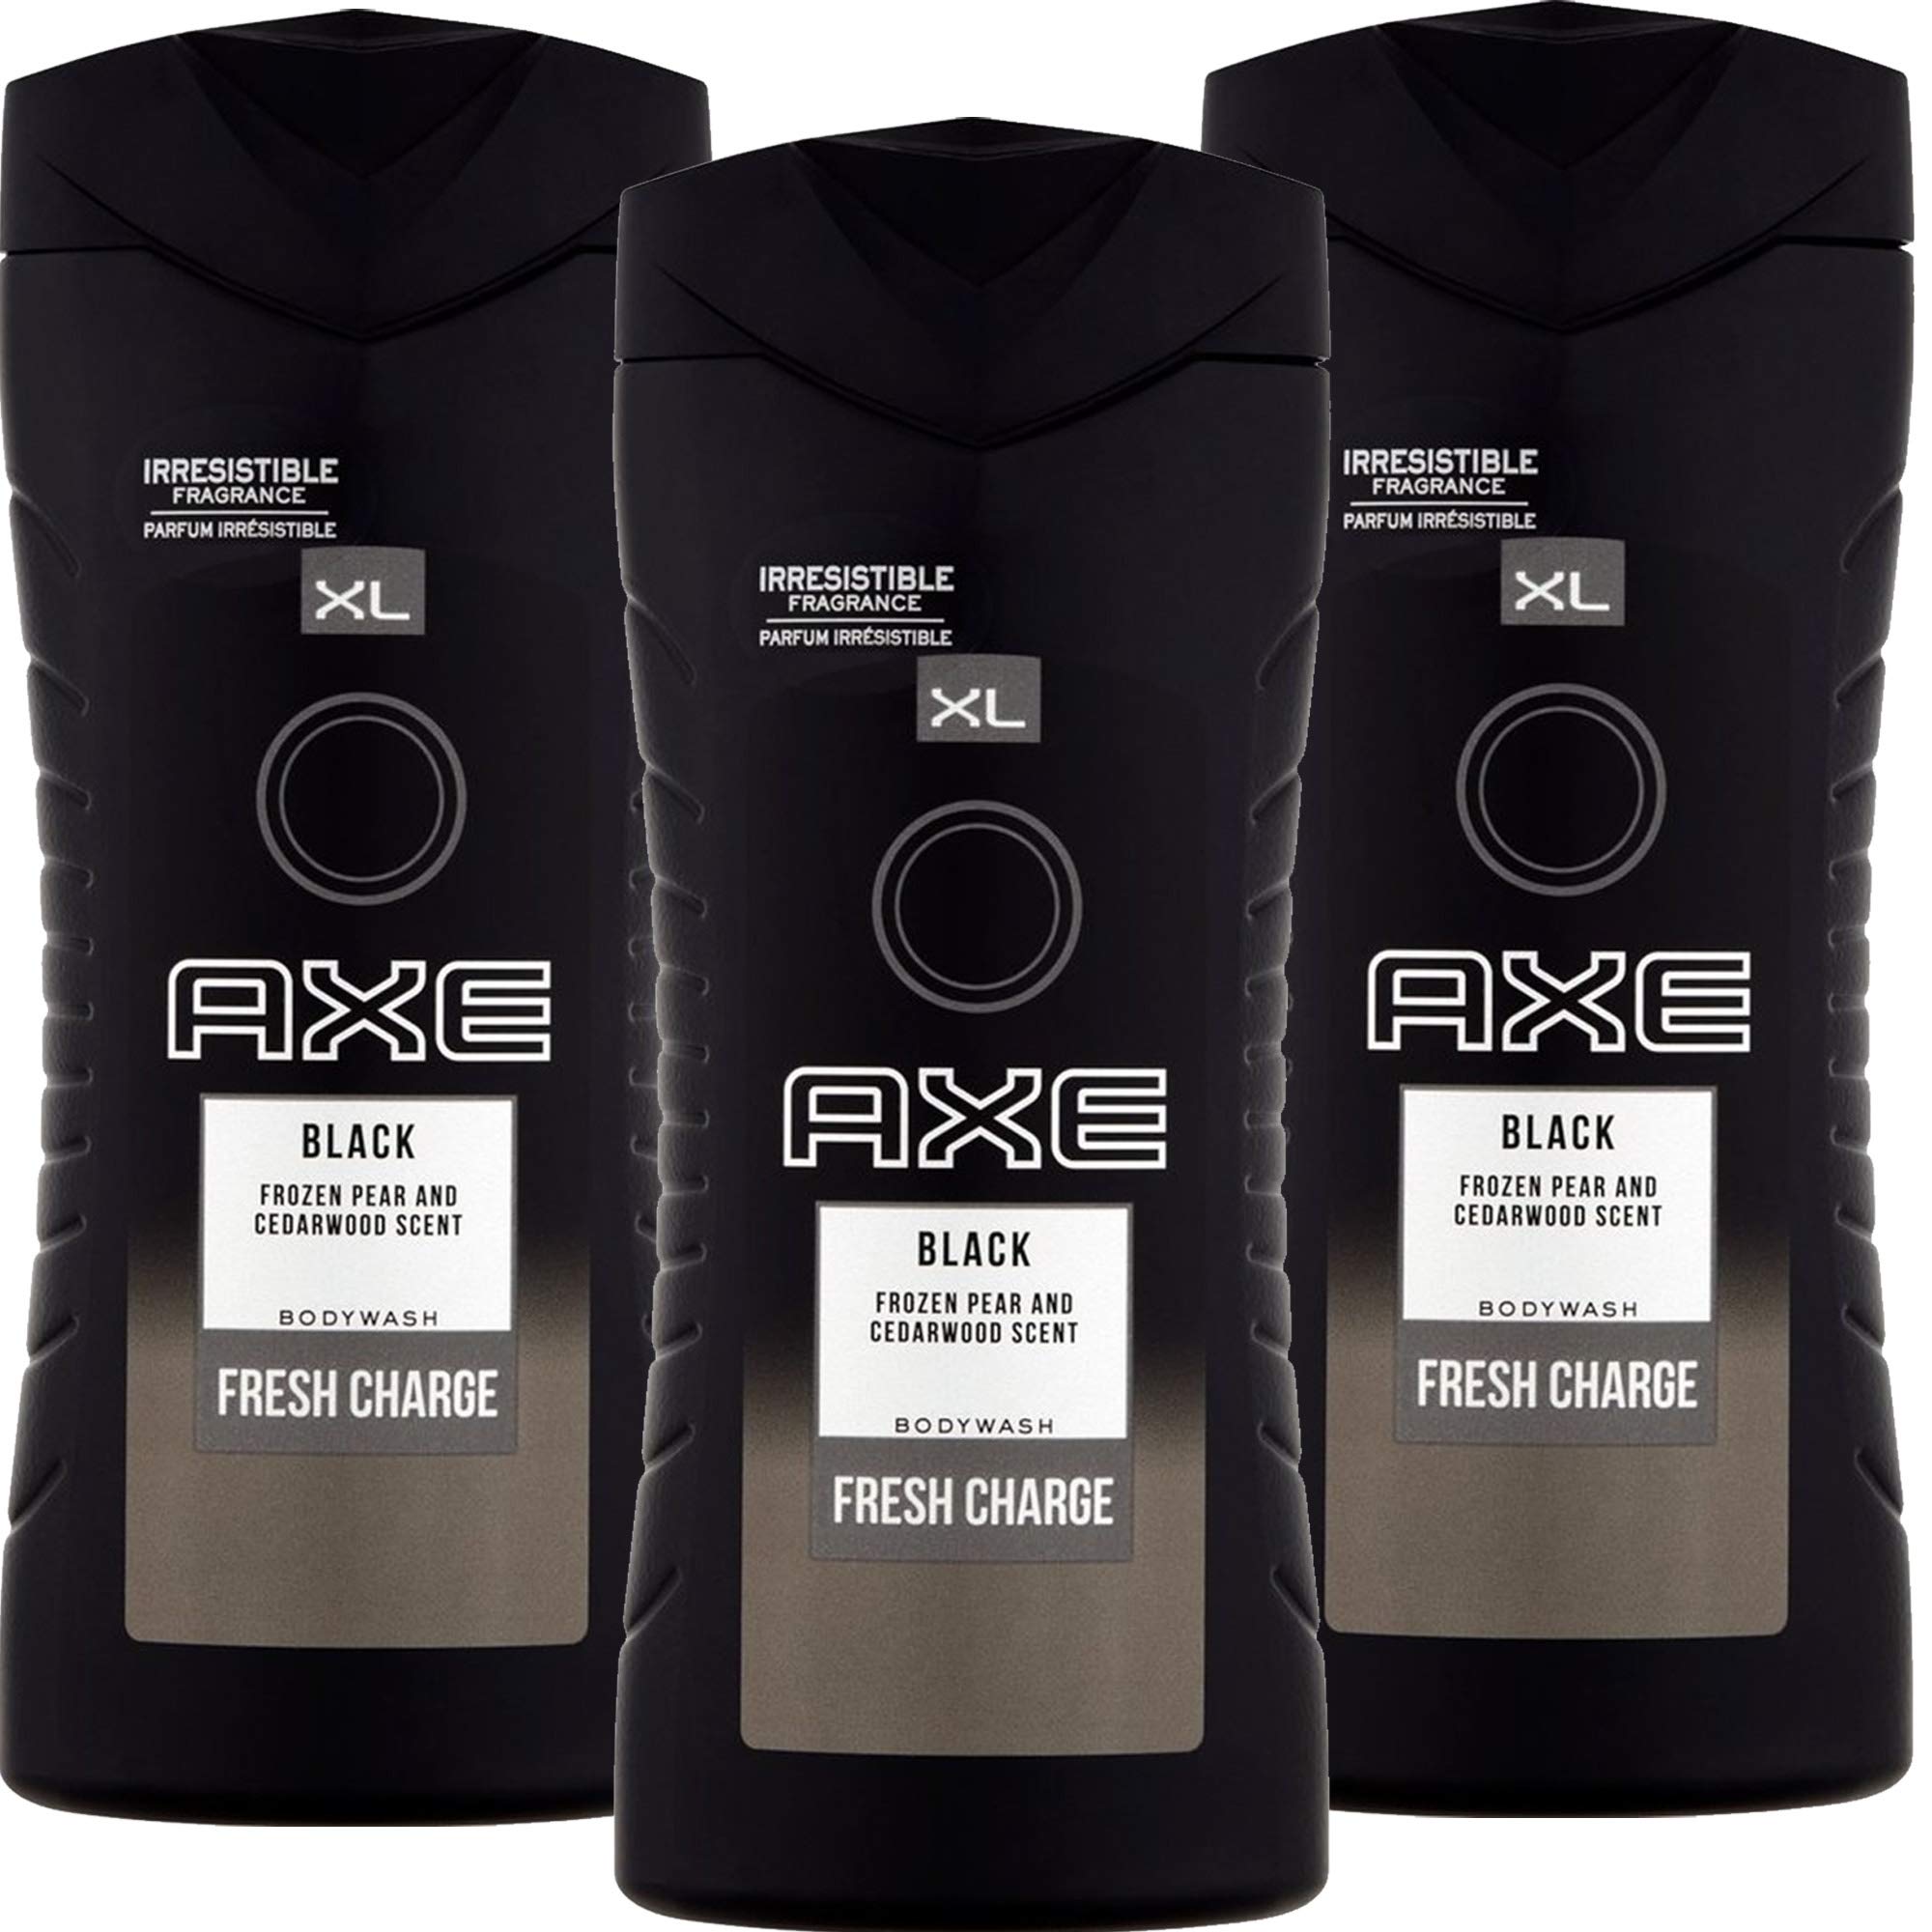 Axe Body Wash For Men, Black, Frozen Pear and Cedarwood Scent, Fresh Charge Shower Gel for Body, 3 Pk x 13.52 Fl.Oz each